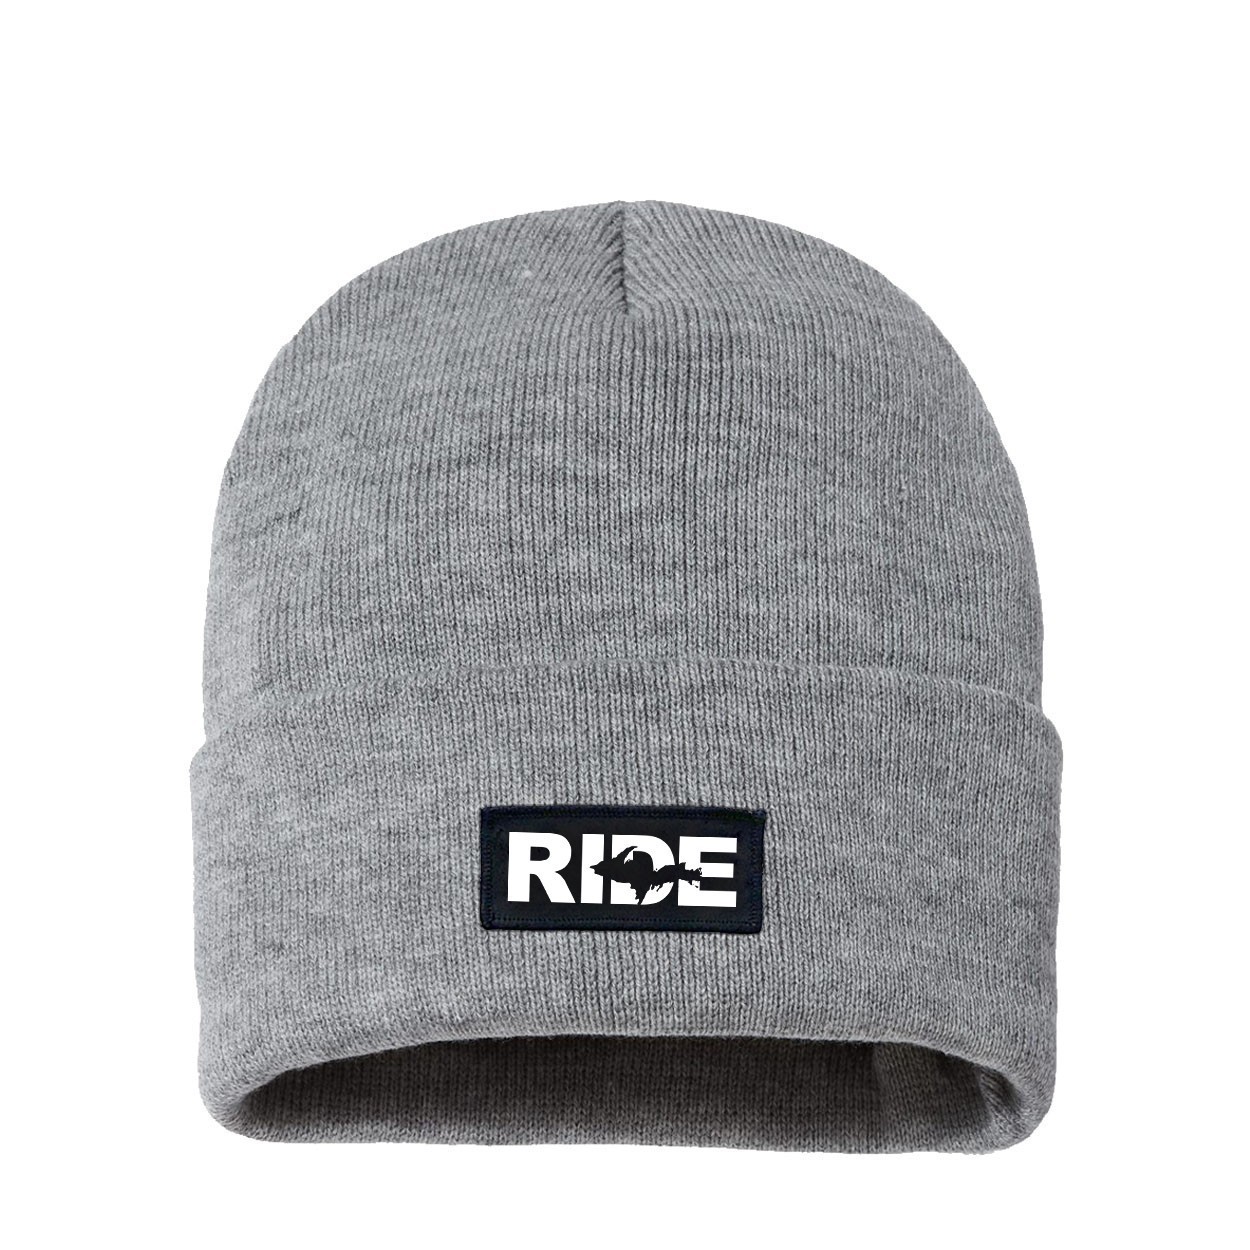 Ride Michigan UP Night Out Woven Patch Night Out Sherpa Lined Cuffed Beanie Heather Gray (White Logo)